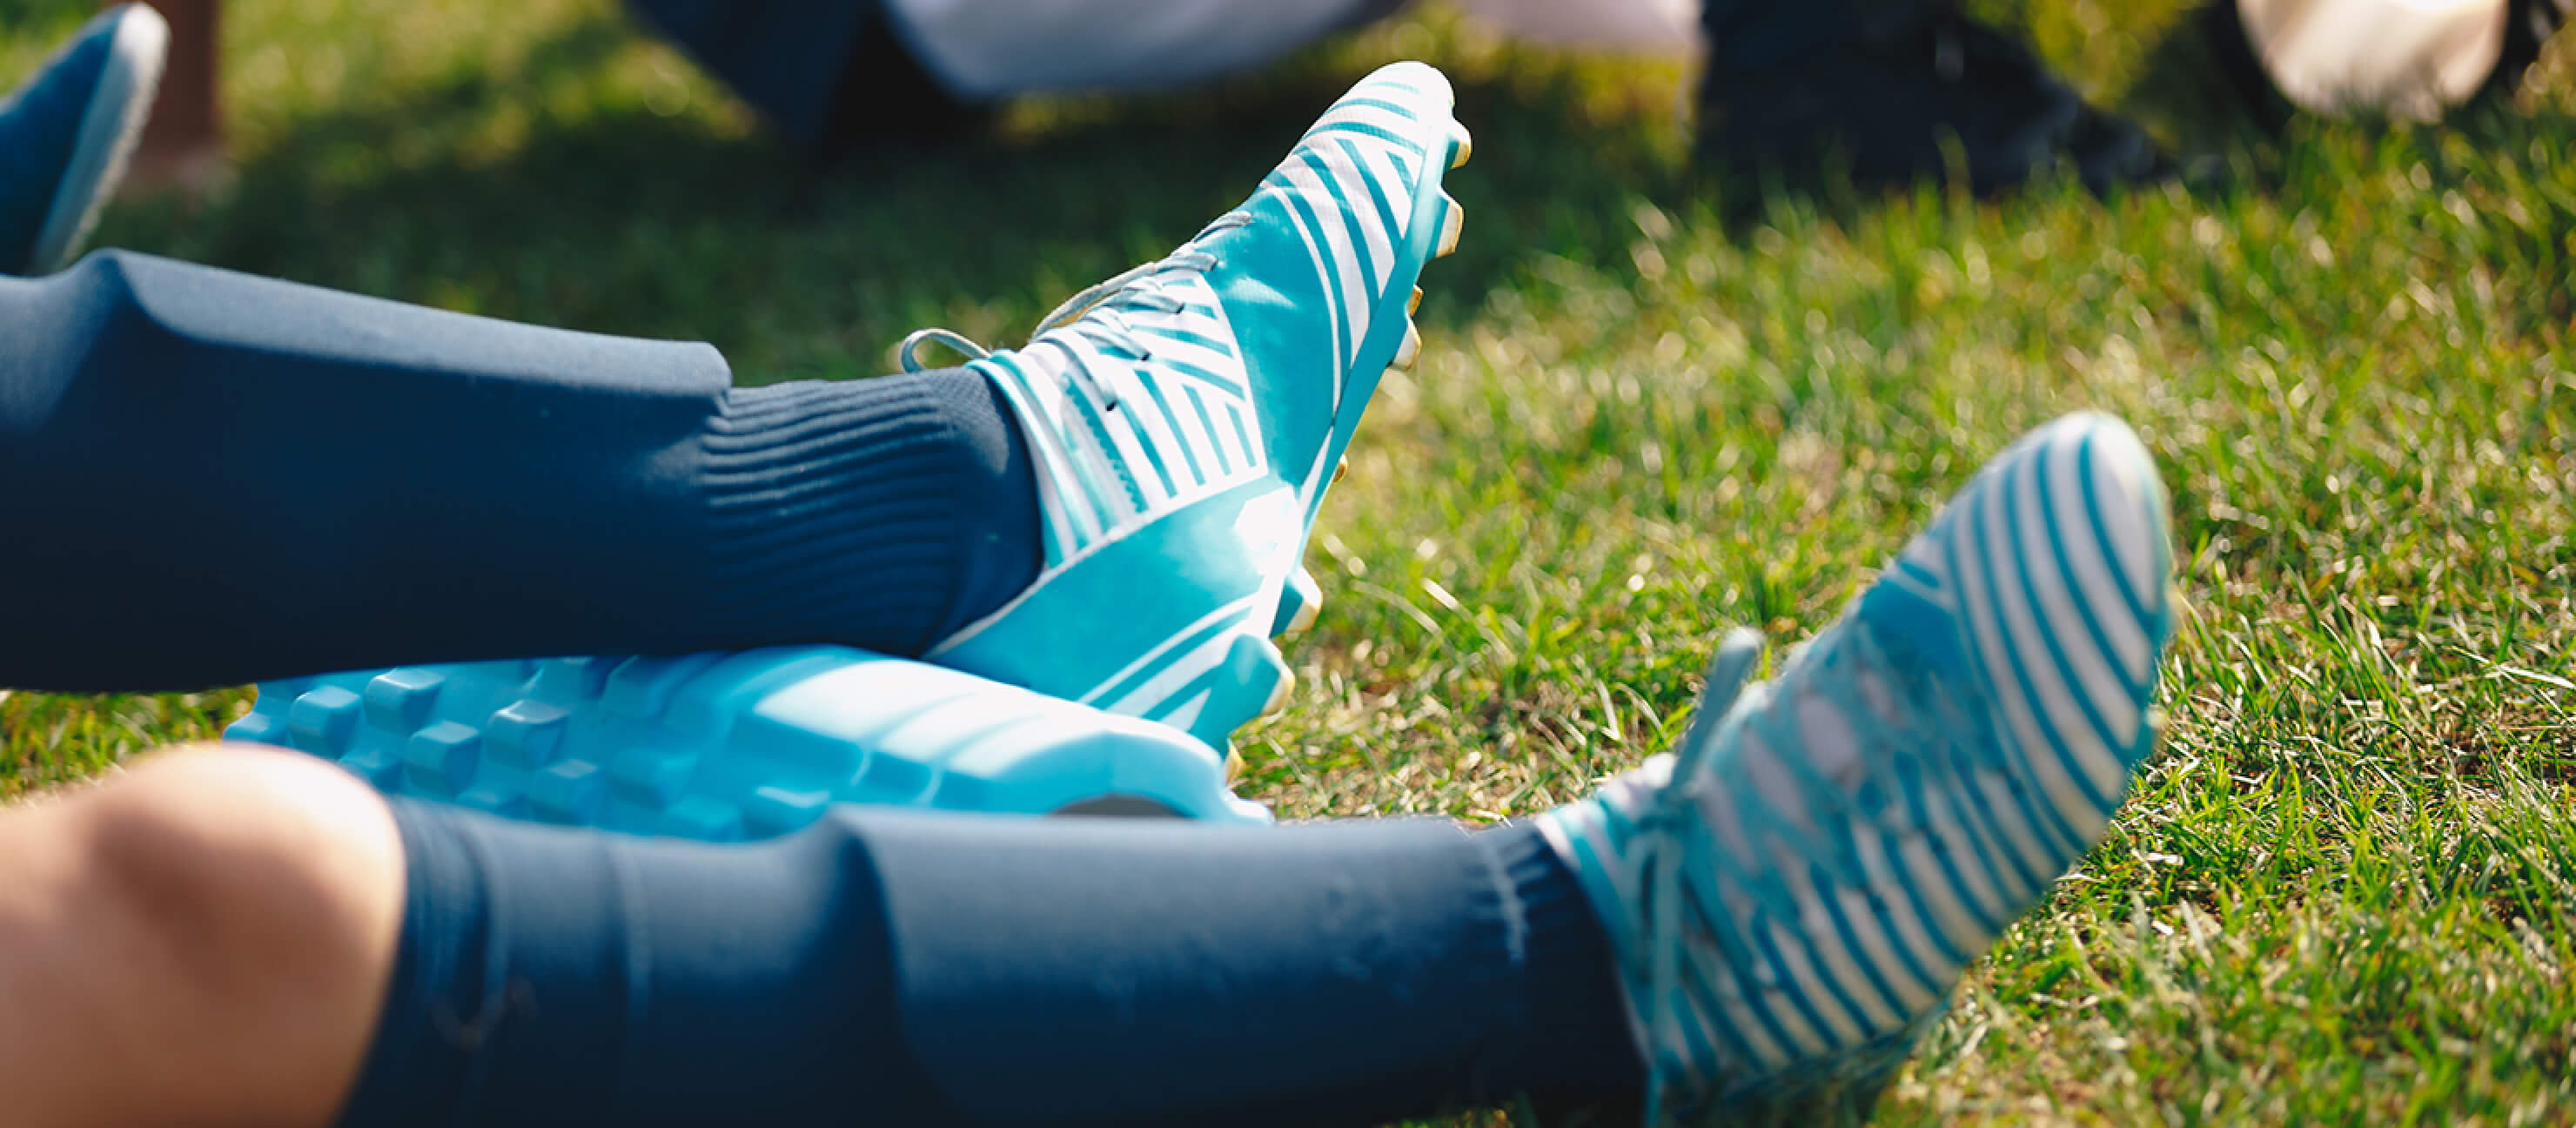 What Are The Differences Between Types of Cleats?